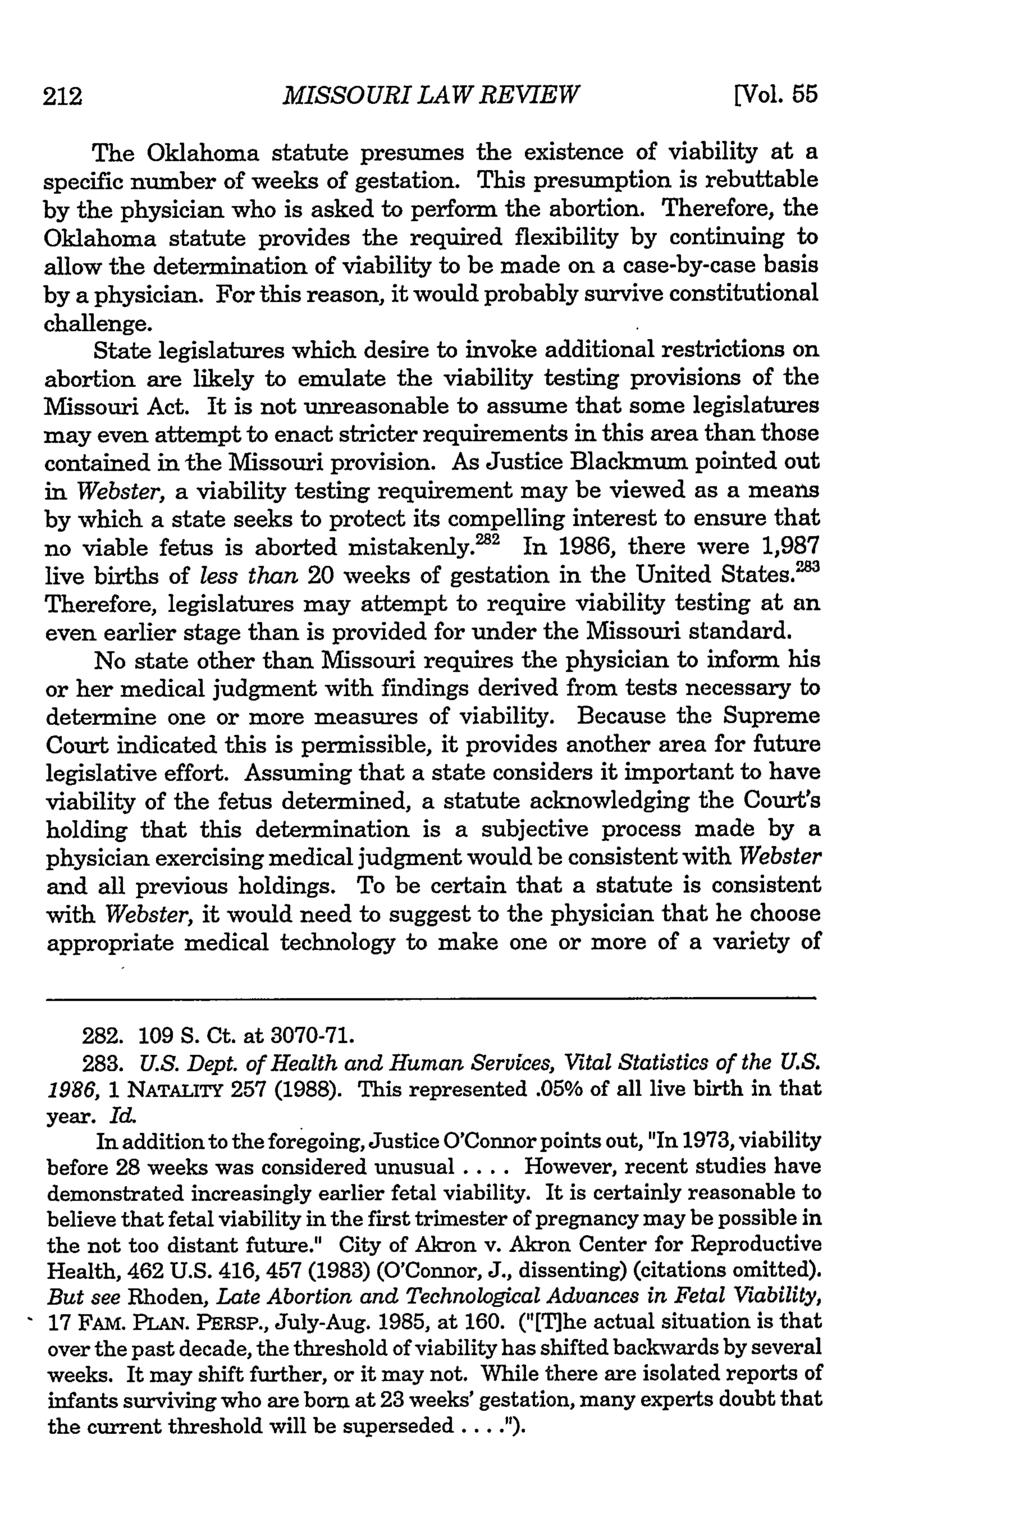 212 Missouri Law Review, Vol. 55, Iss. 1 [1990], Art. 5 MISSOURI LAW REVIEW [Vol. 55 The Oklahoma statute presumes the existence of viability at a specific number of weeks of gestation.